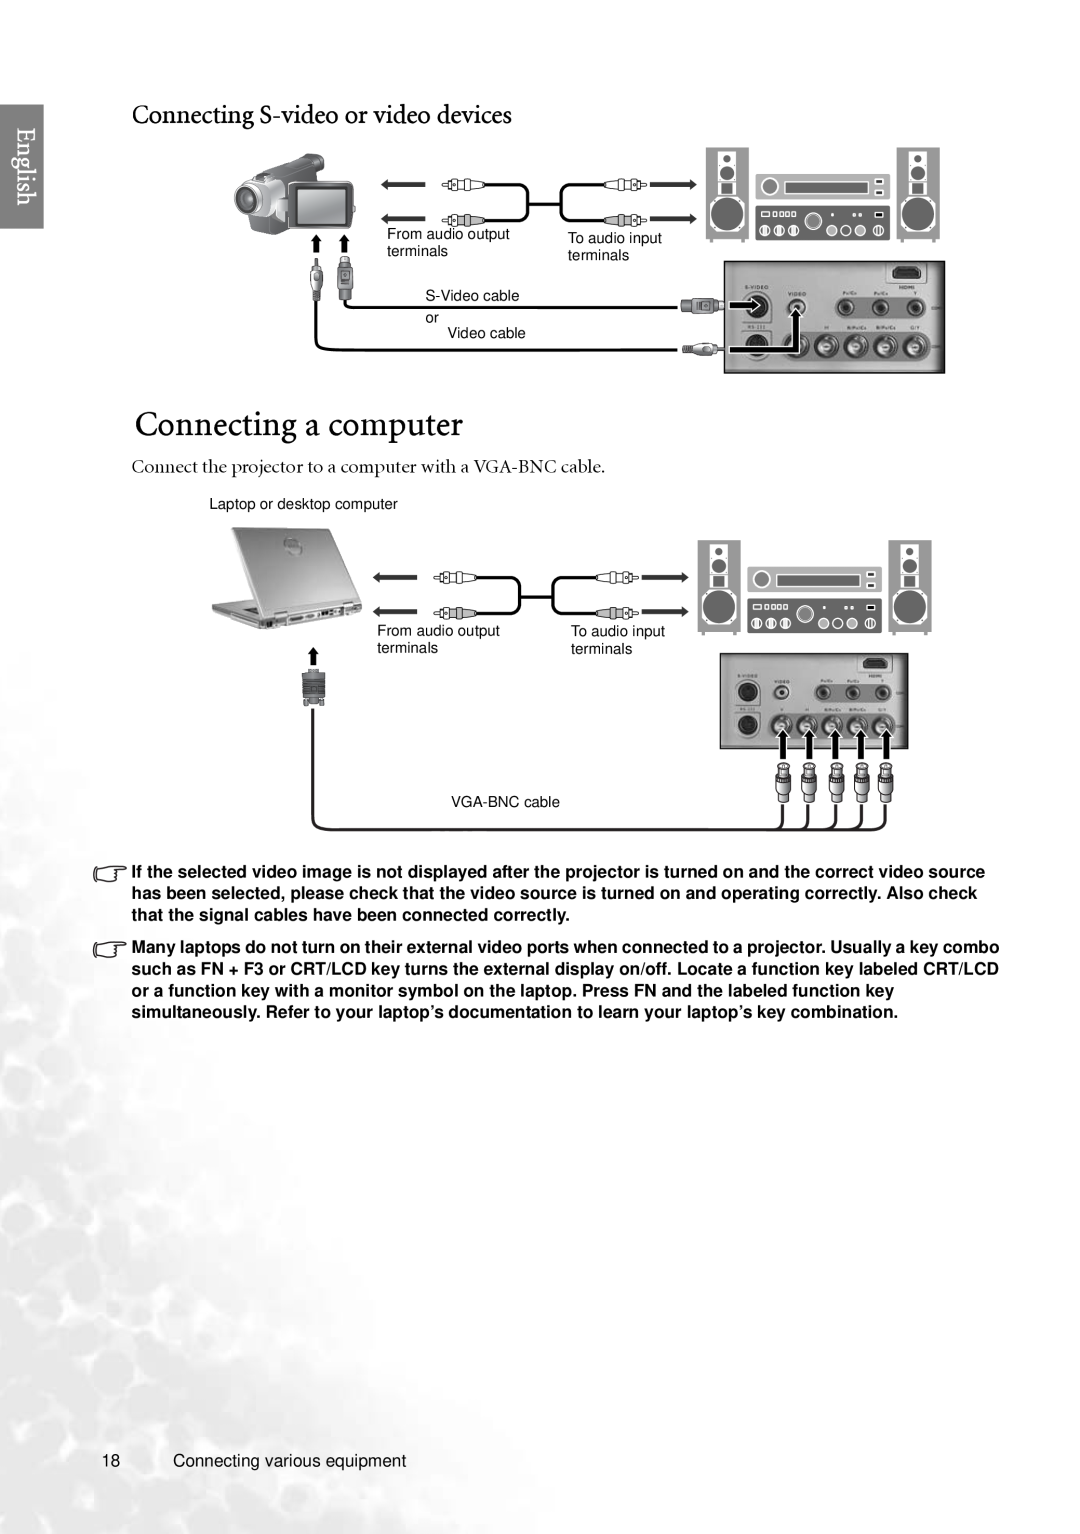 BenQ PE7700 user manual Connecting a computer, Connecting S-video or video devices, English 